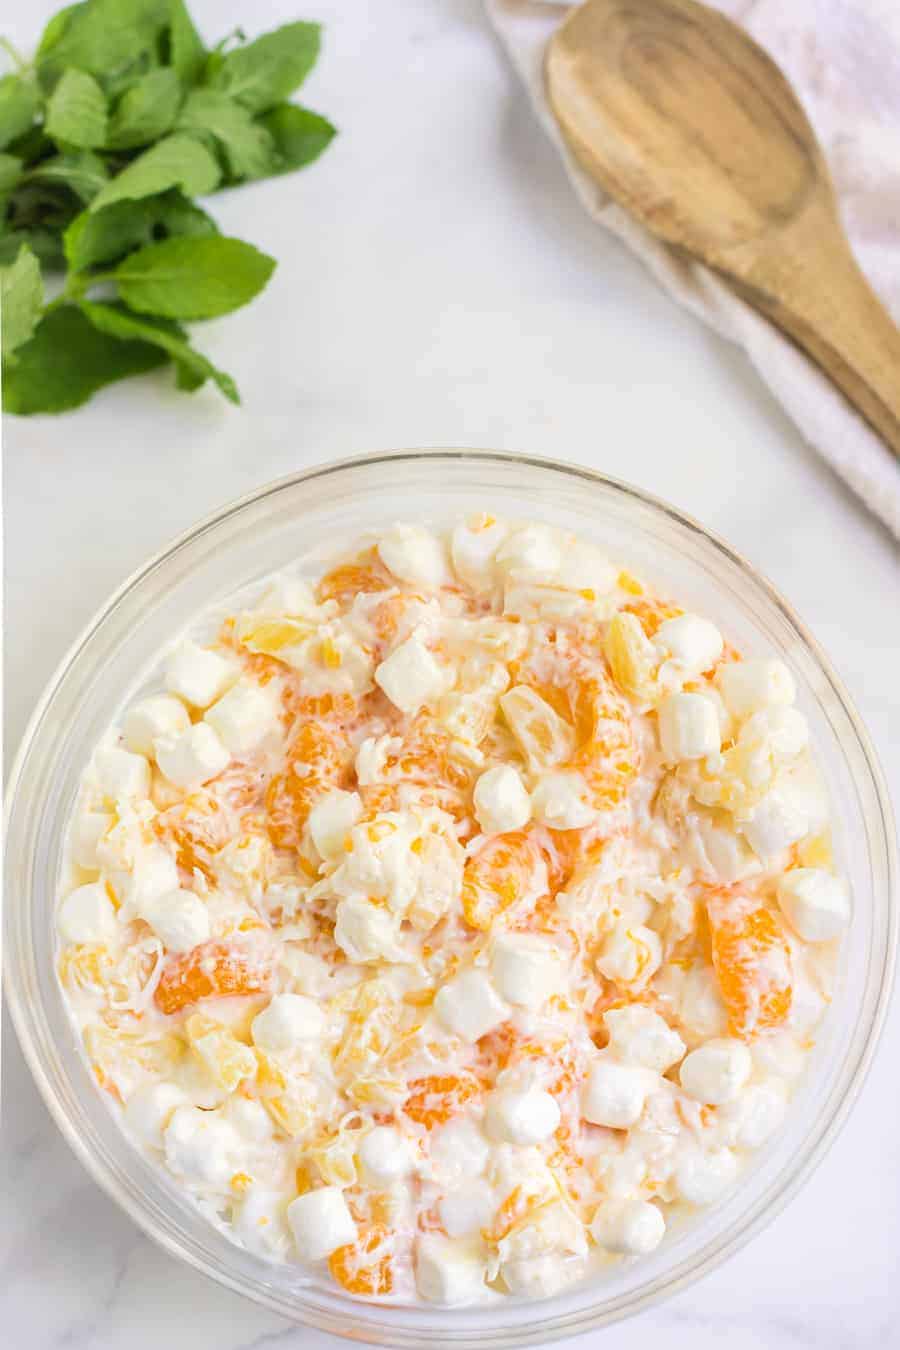 6 cup salad with oranges marshmallows and a cream fruit salad mix in a glass mixing bowl